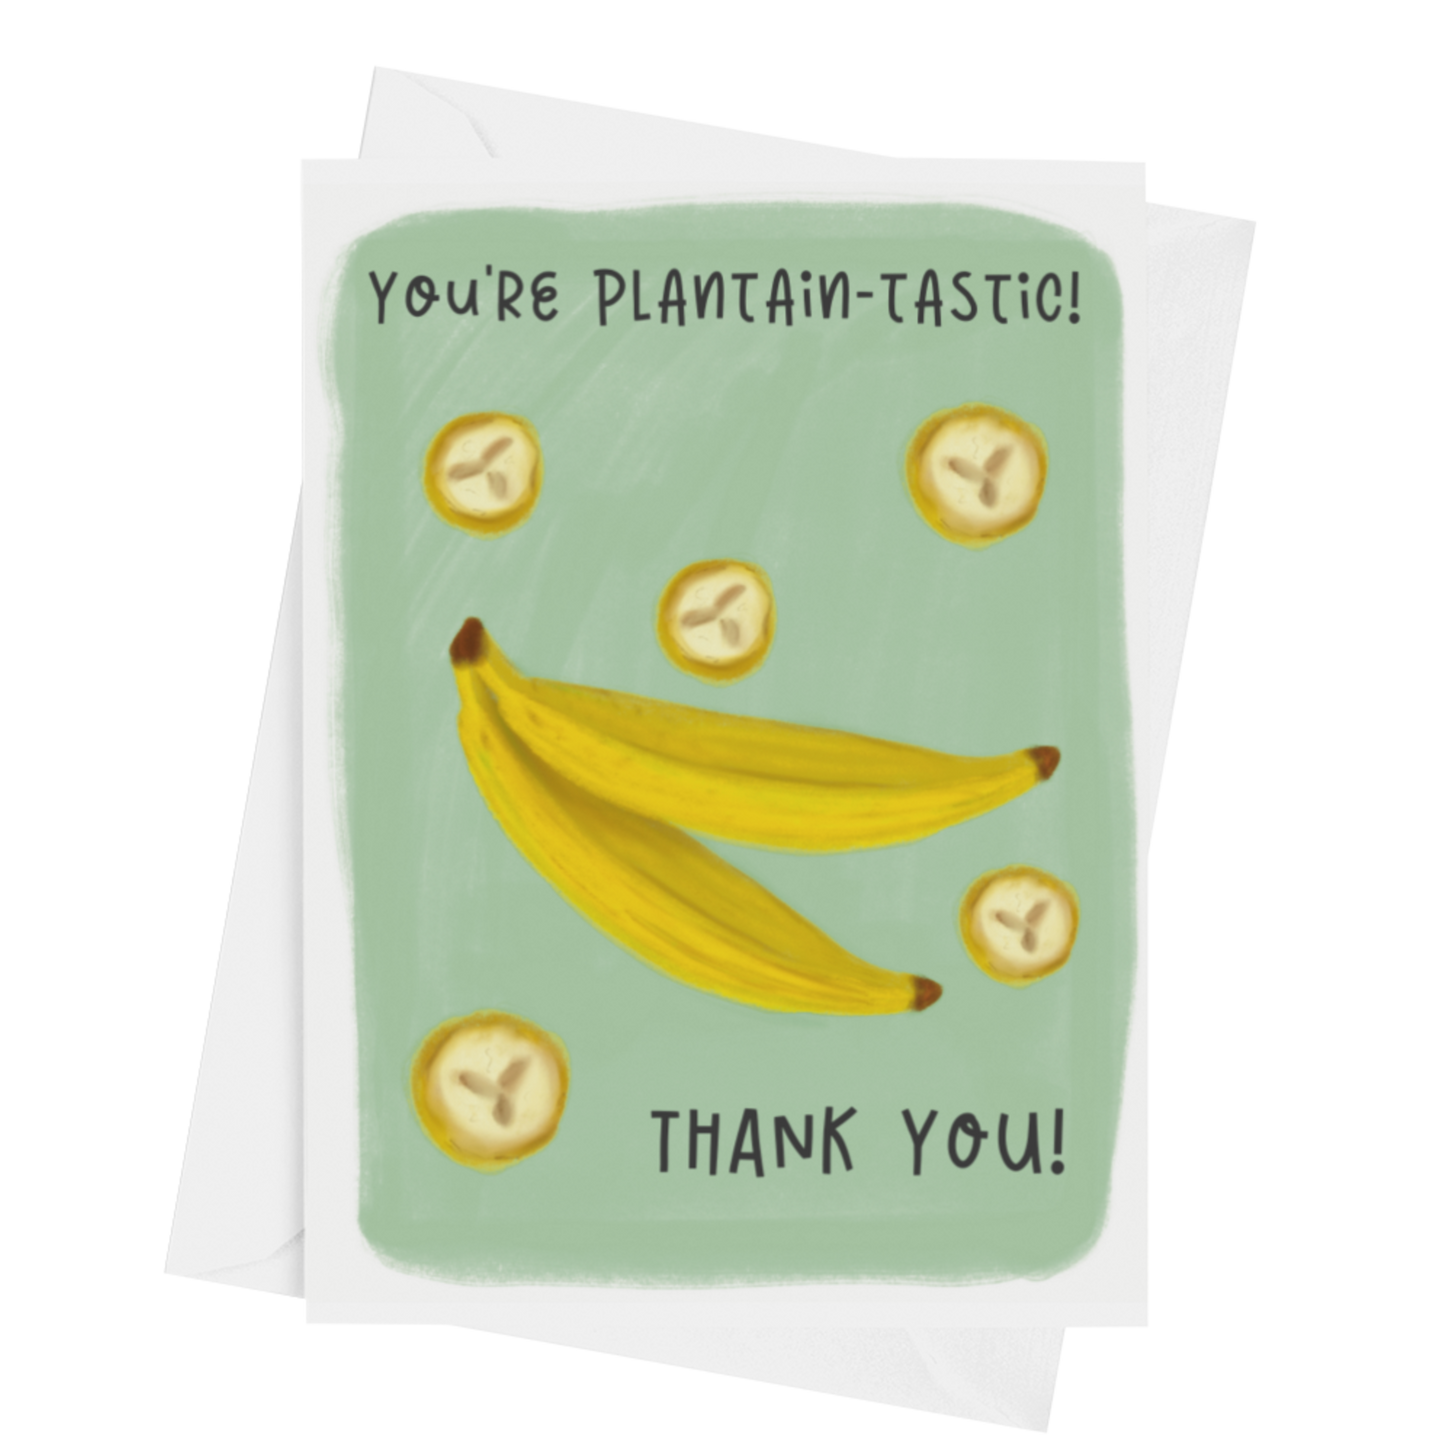 You're plantain-tastic THANK YOU!